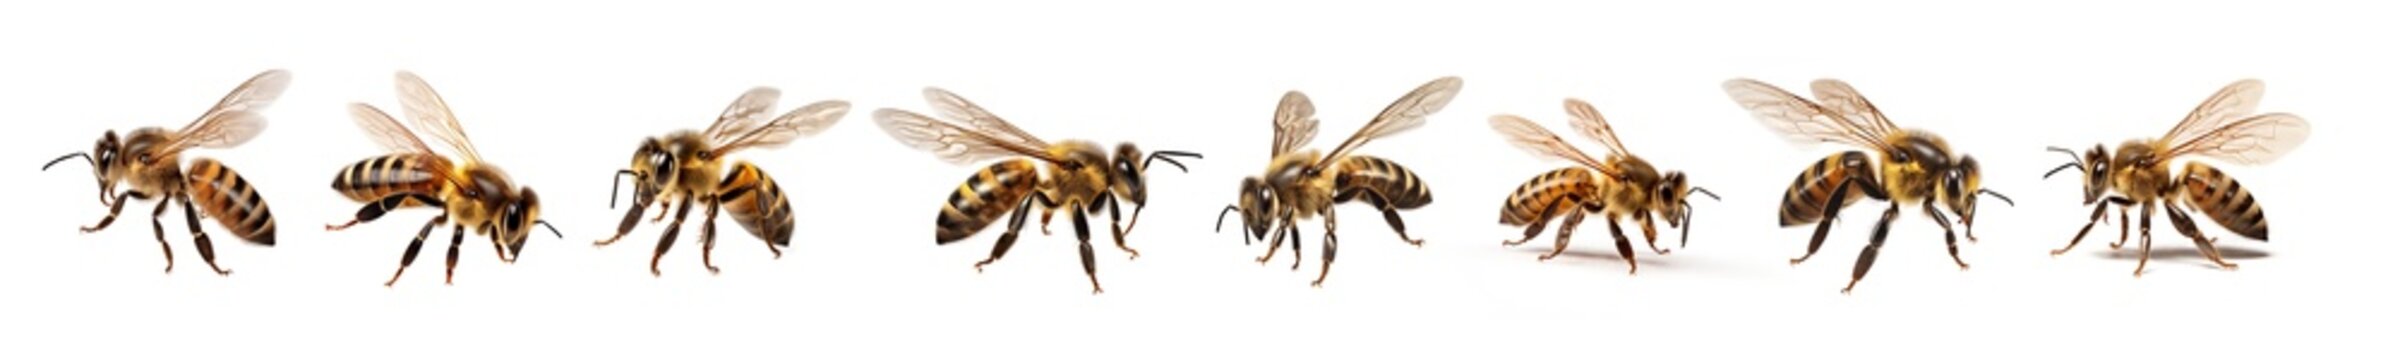 Set of natural bees on a transparent or white background. Macro side close-up view. png image. 